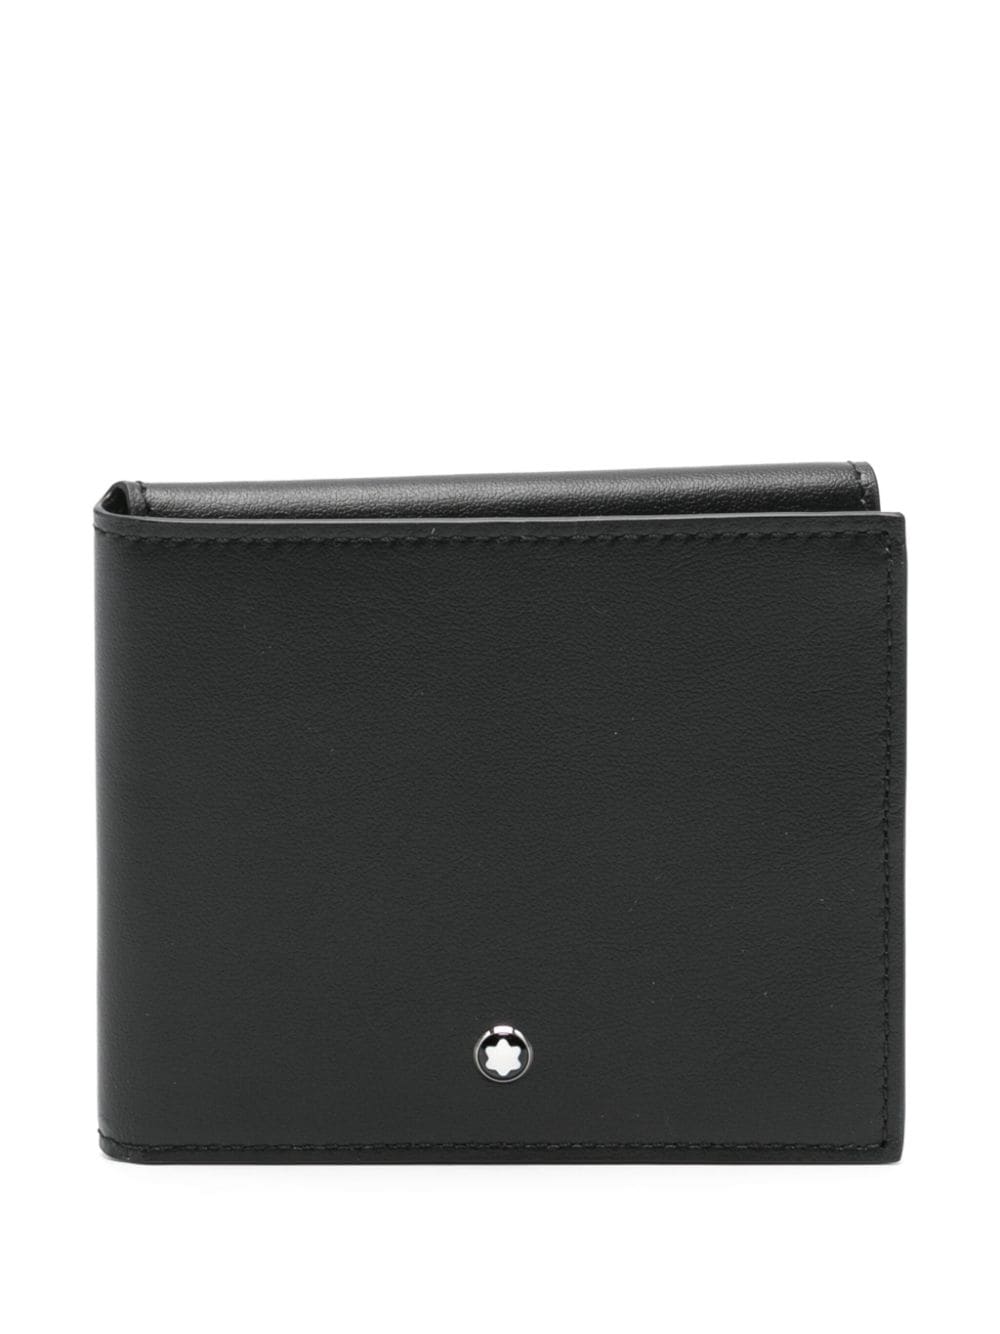 Montblanc Tri-fold Leather Wallet In Black